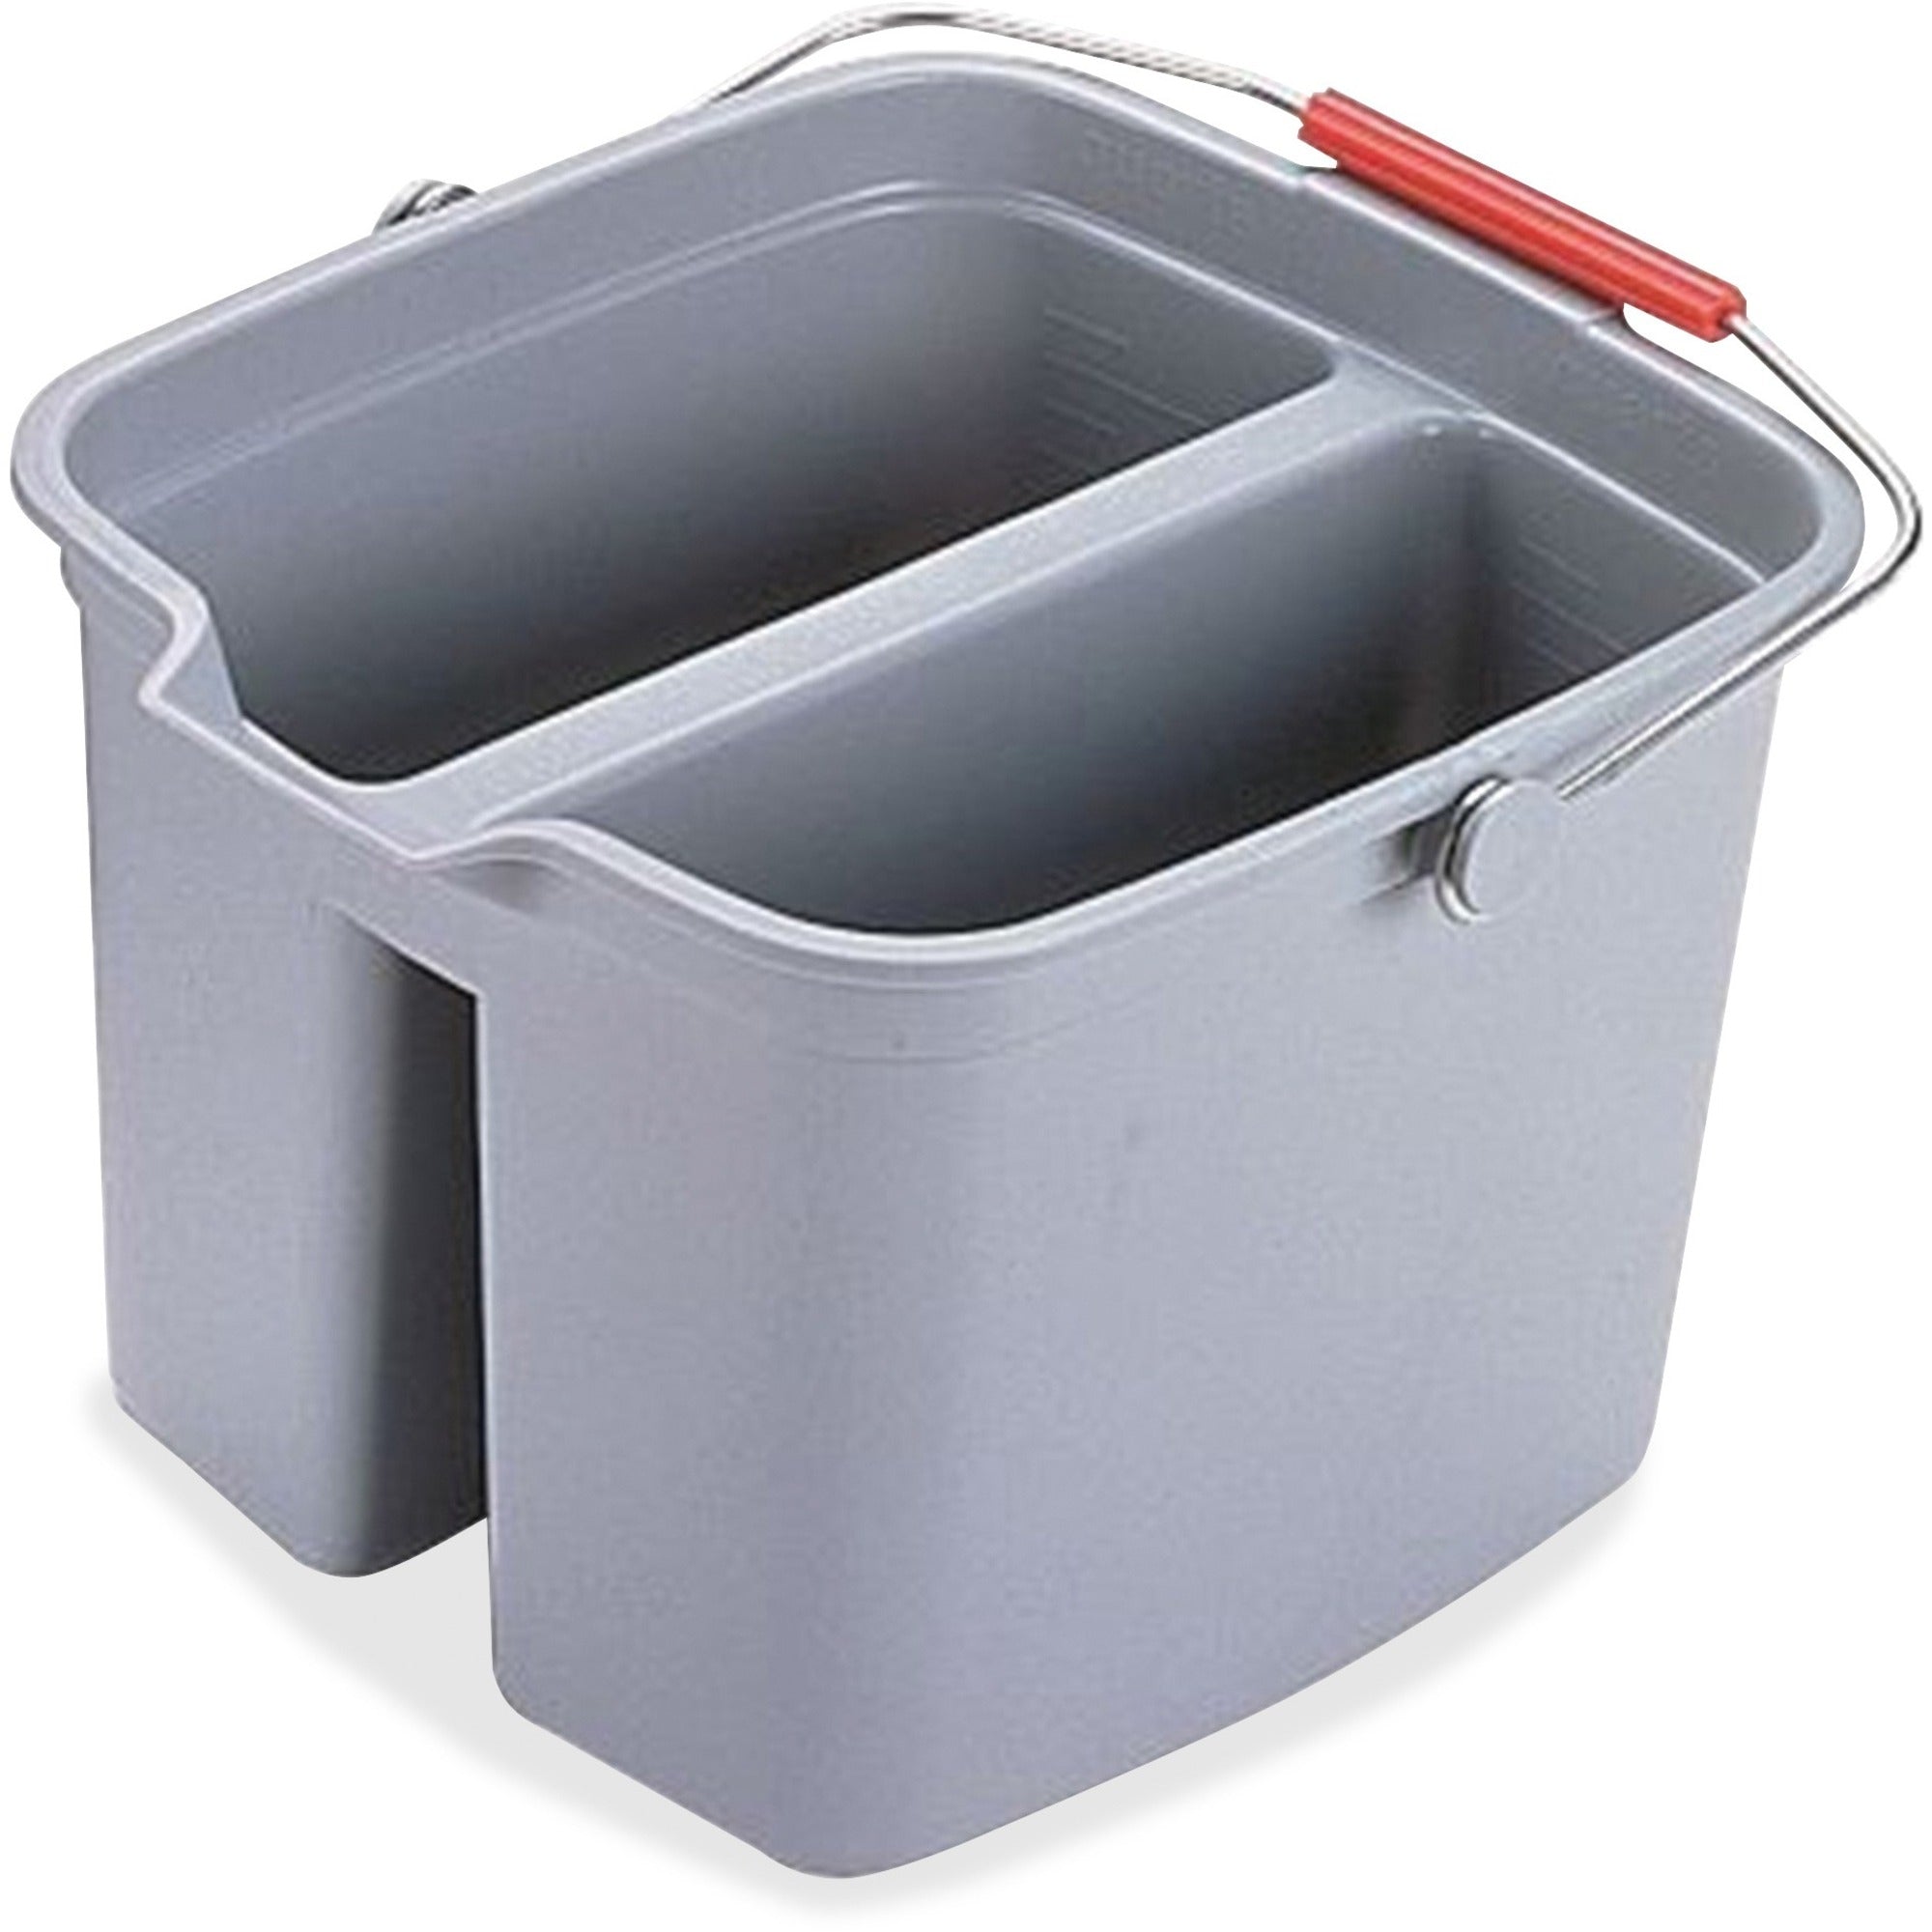 rubbermaid-commercial-double-pail-425-gal-sturdy-handle-101-x-139-plastic-gray-6-carton_rcp261700gyct - 1